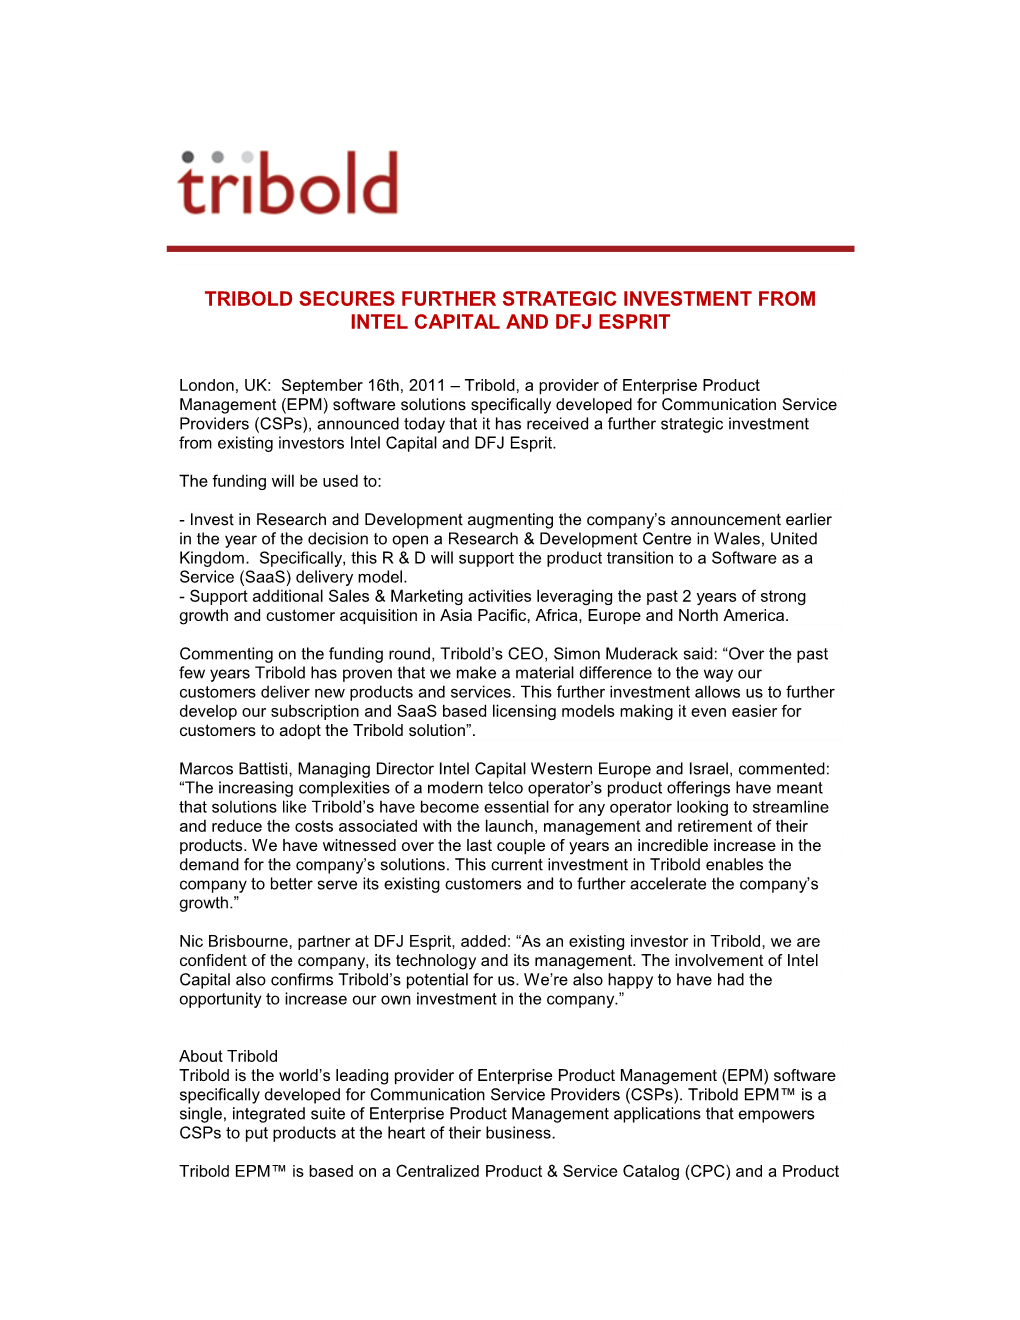 Tribold Secures Further Strategic Investment from Intel Capital and Dfj Esprit